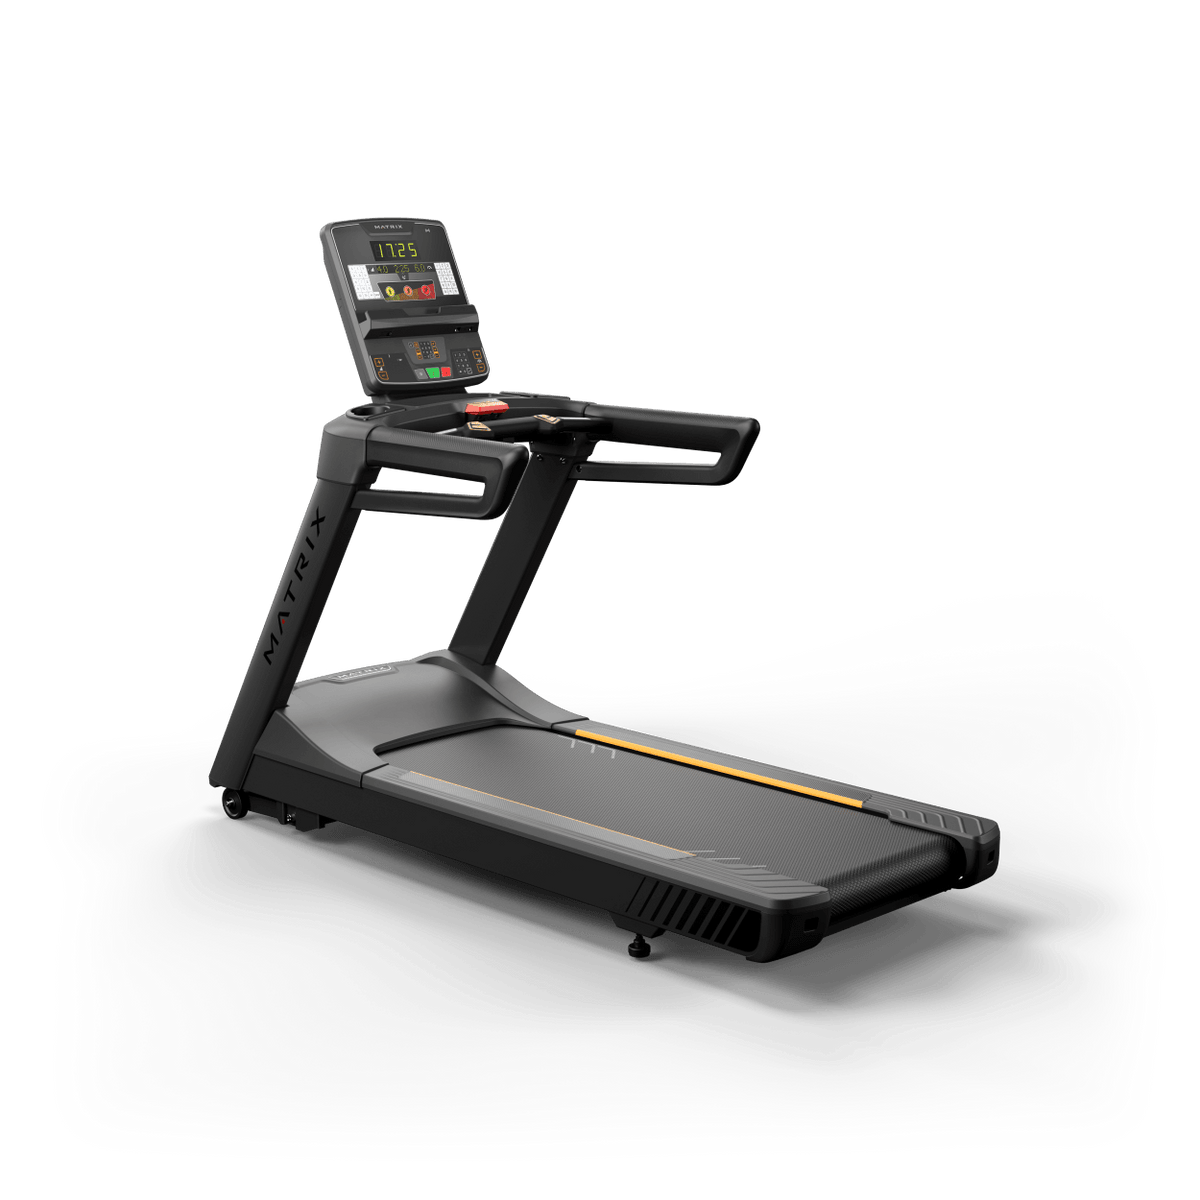 Matrix Fitness Endurance Treadmill with Group Training Console full view | Fitness Experience